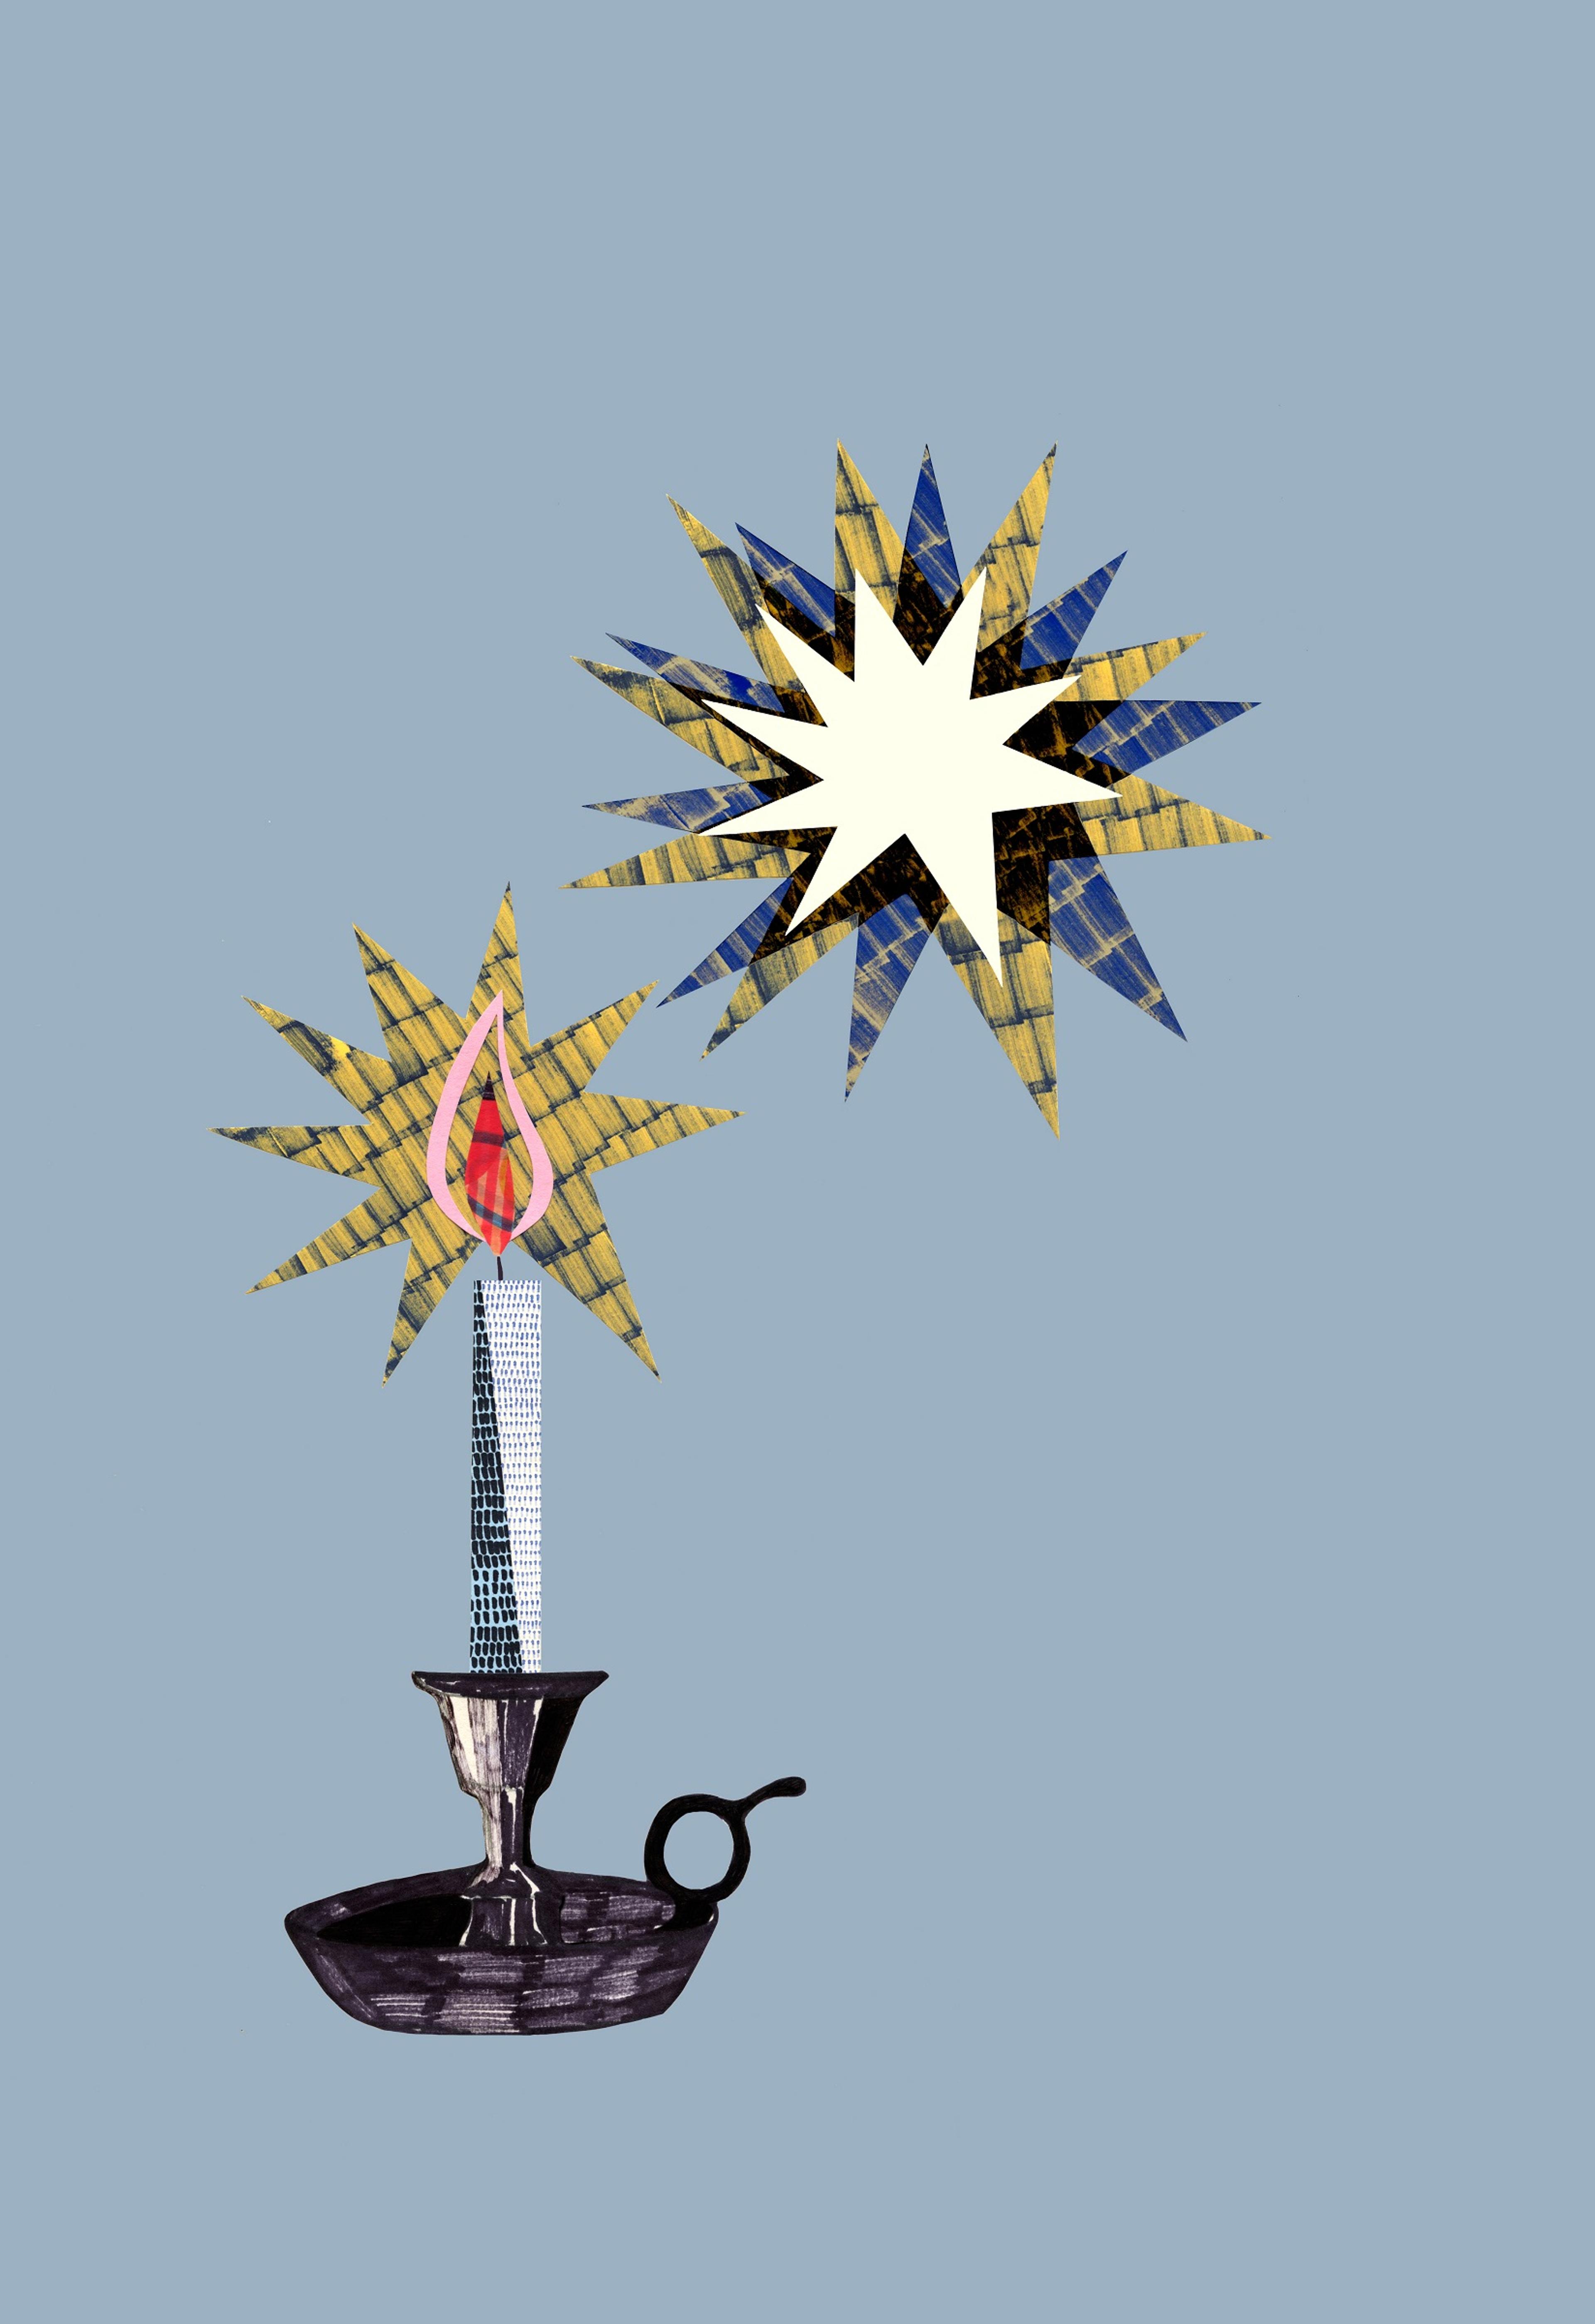 Illustration of a candle with a starburst shape above